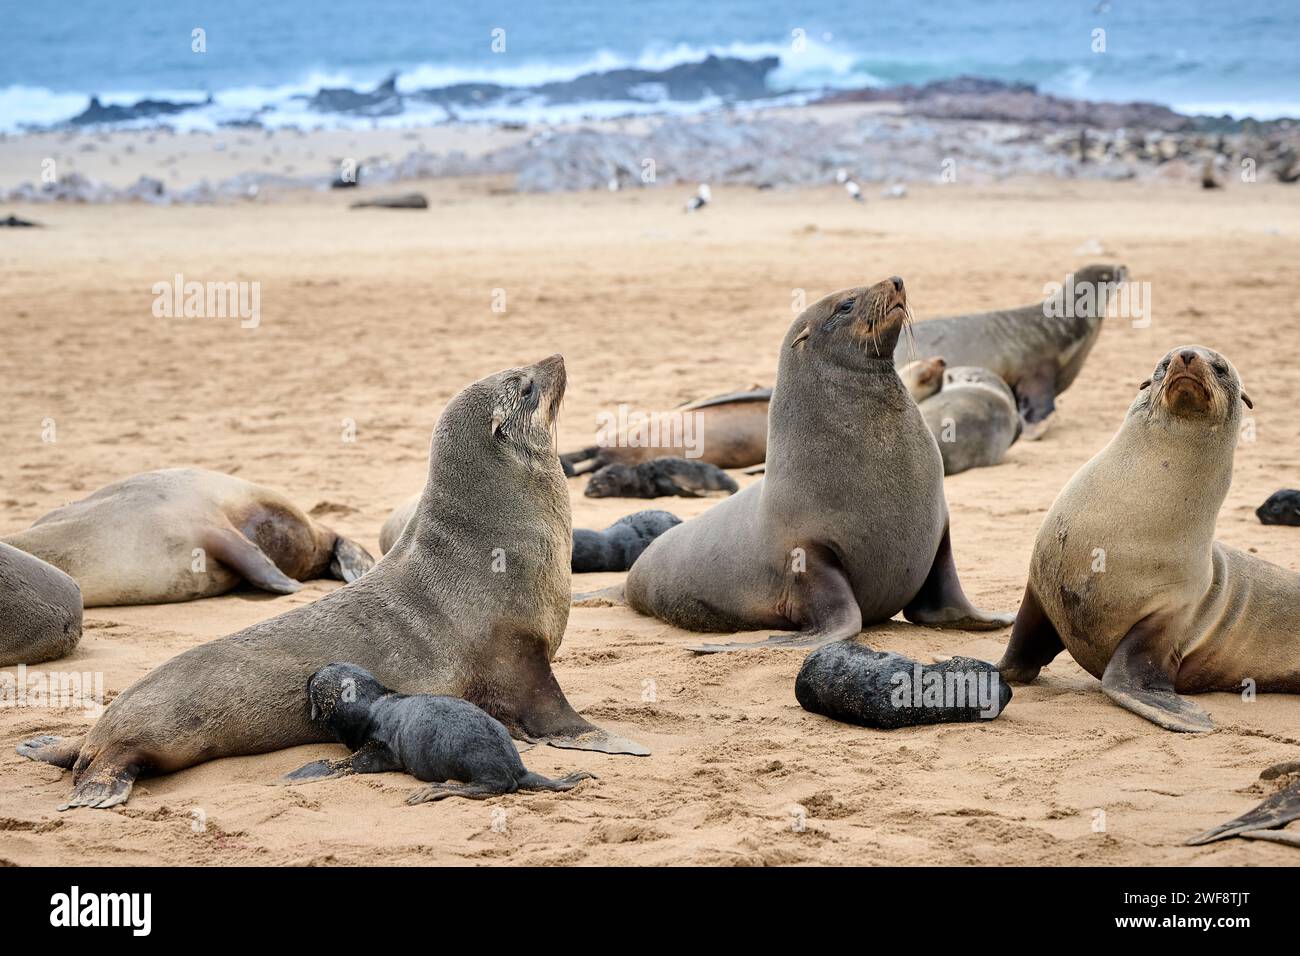 Brown fur seal colonies with babies, Cape Cross Seal Reserve, Namibia, Africa Stock Photo